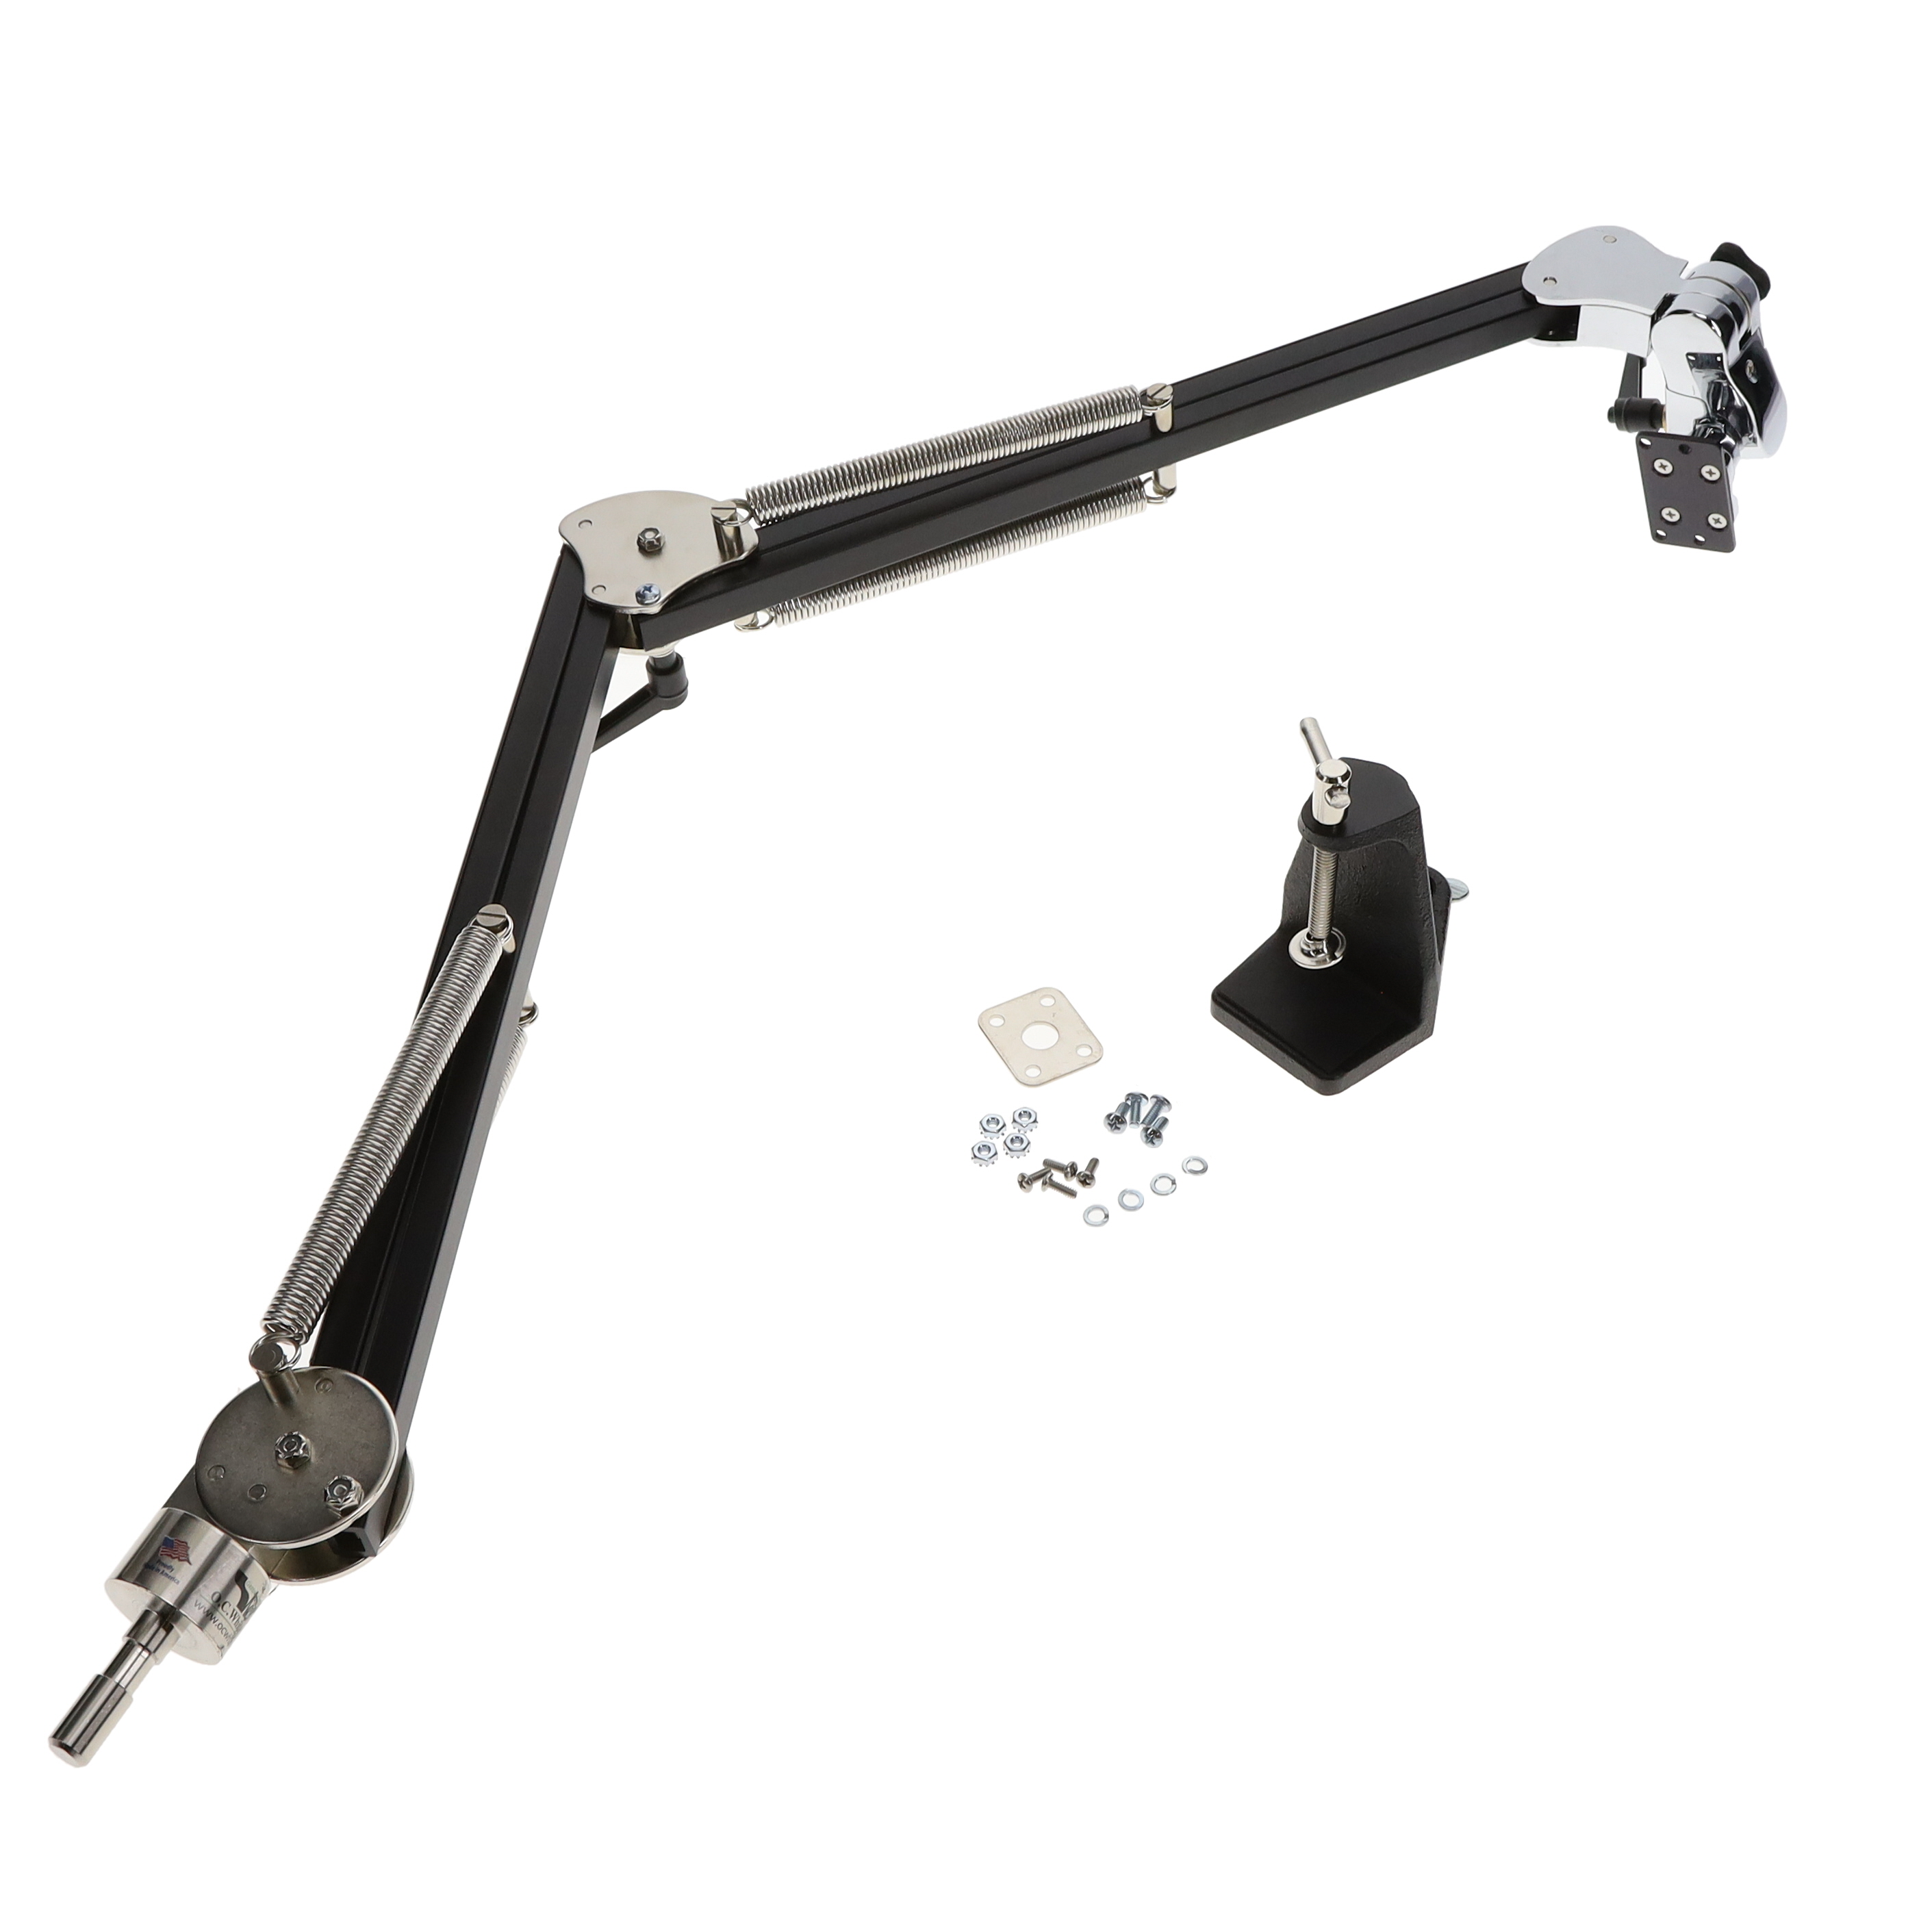 【770047】BOOM ARM, FOR BENCHTOP IONIZER